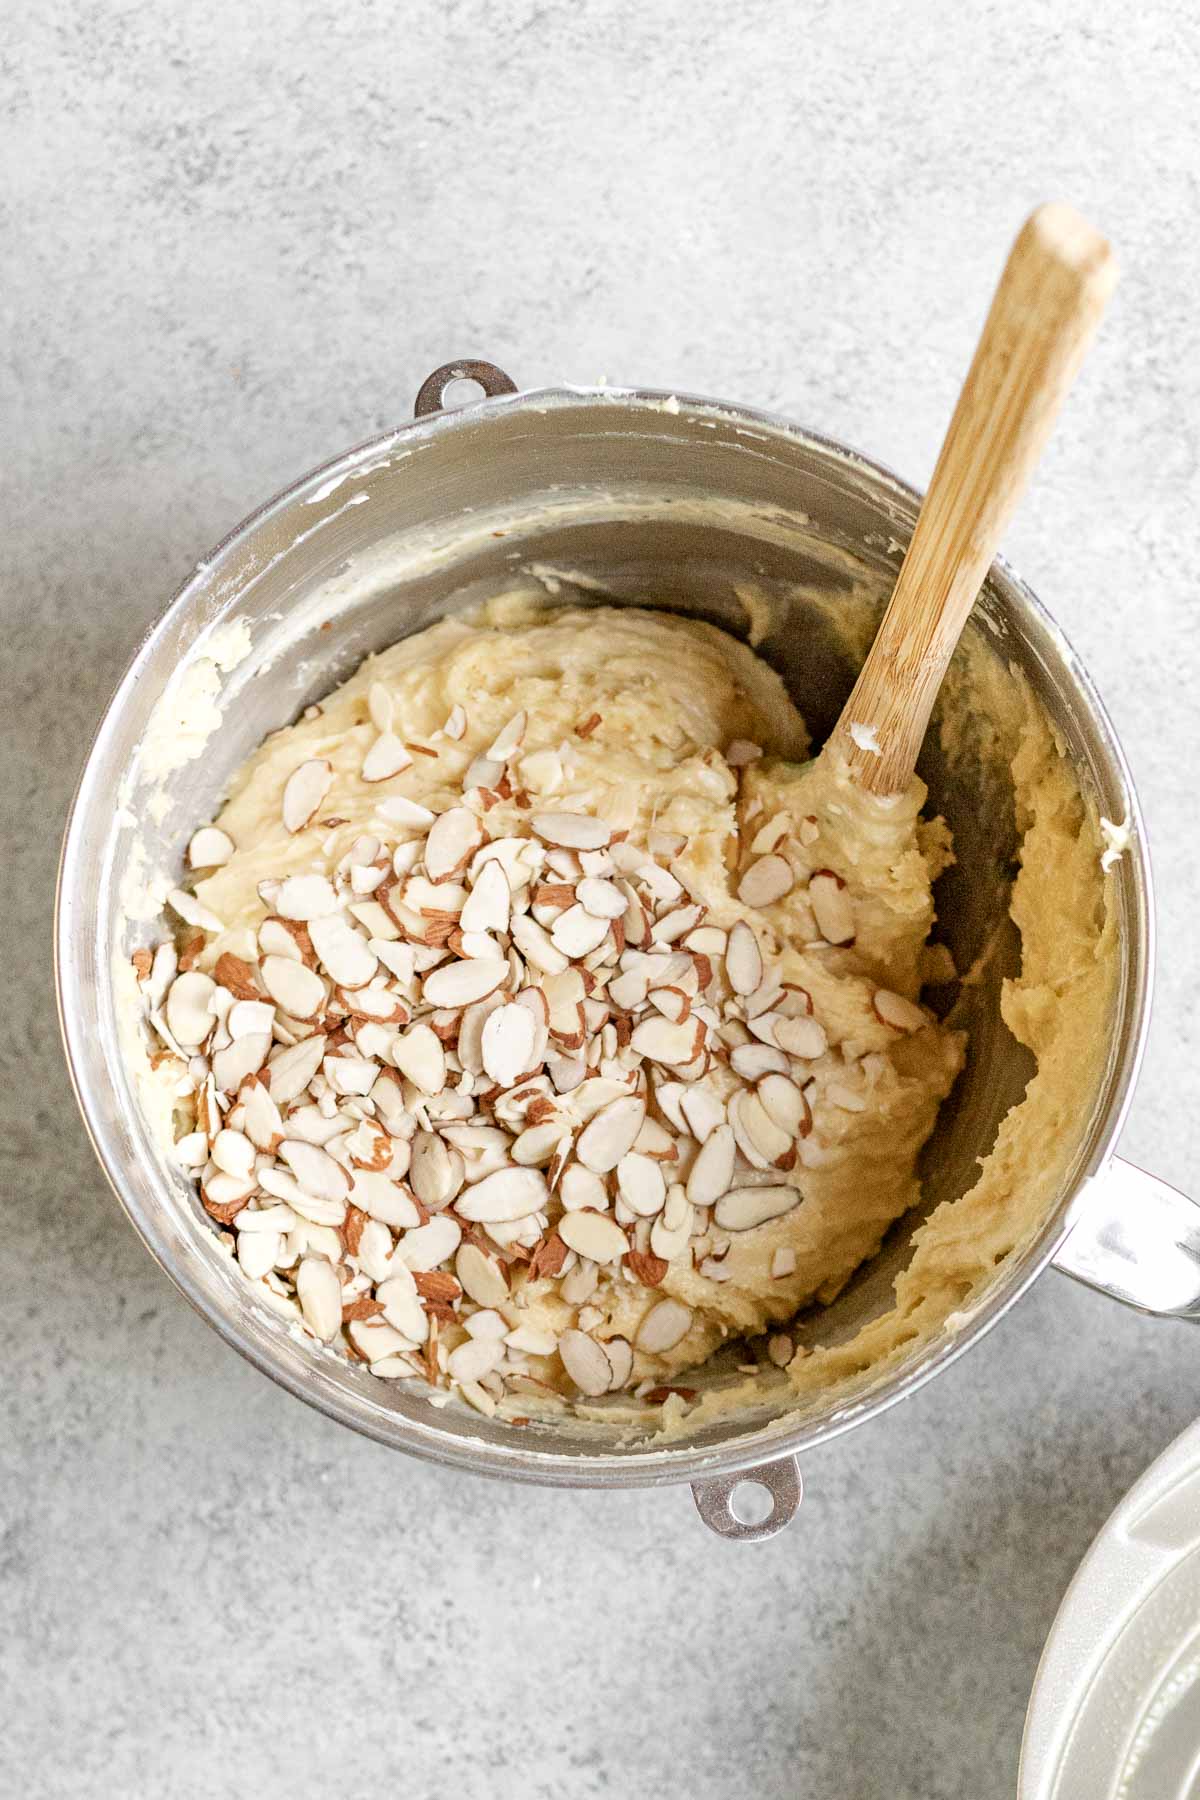 Almond Bundt Cake adding almonds to batter in mixing bowl